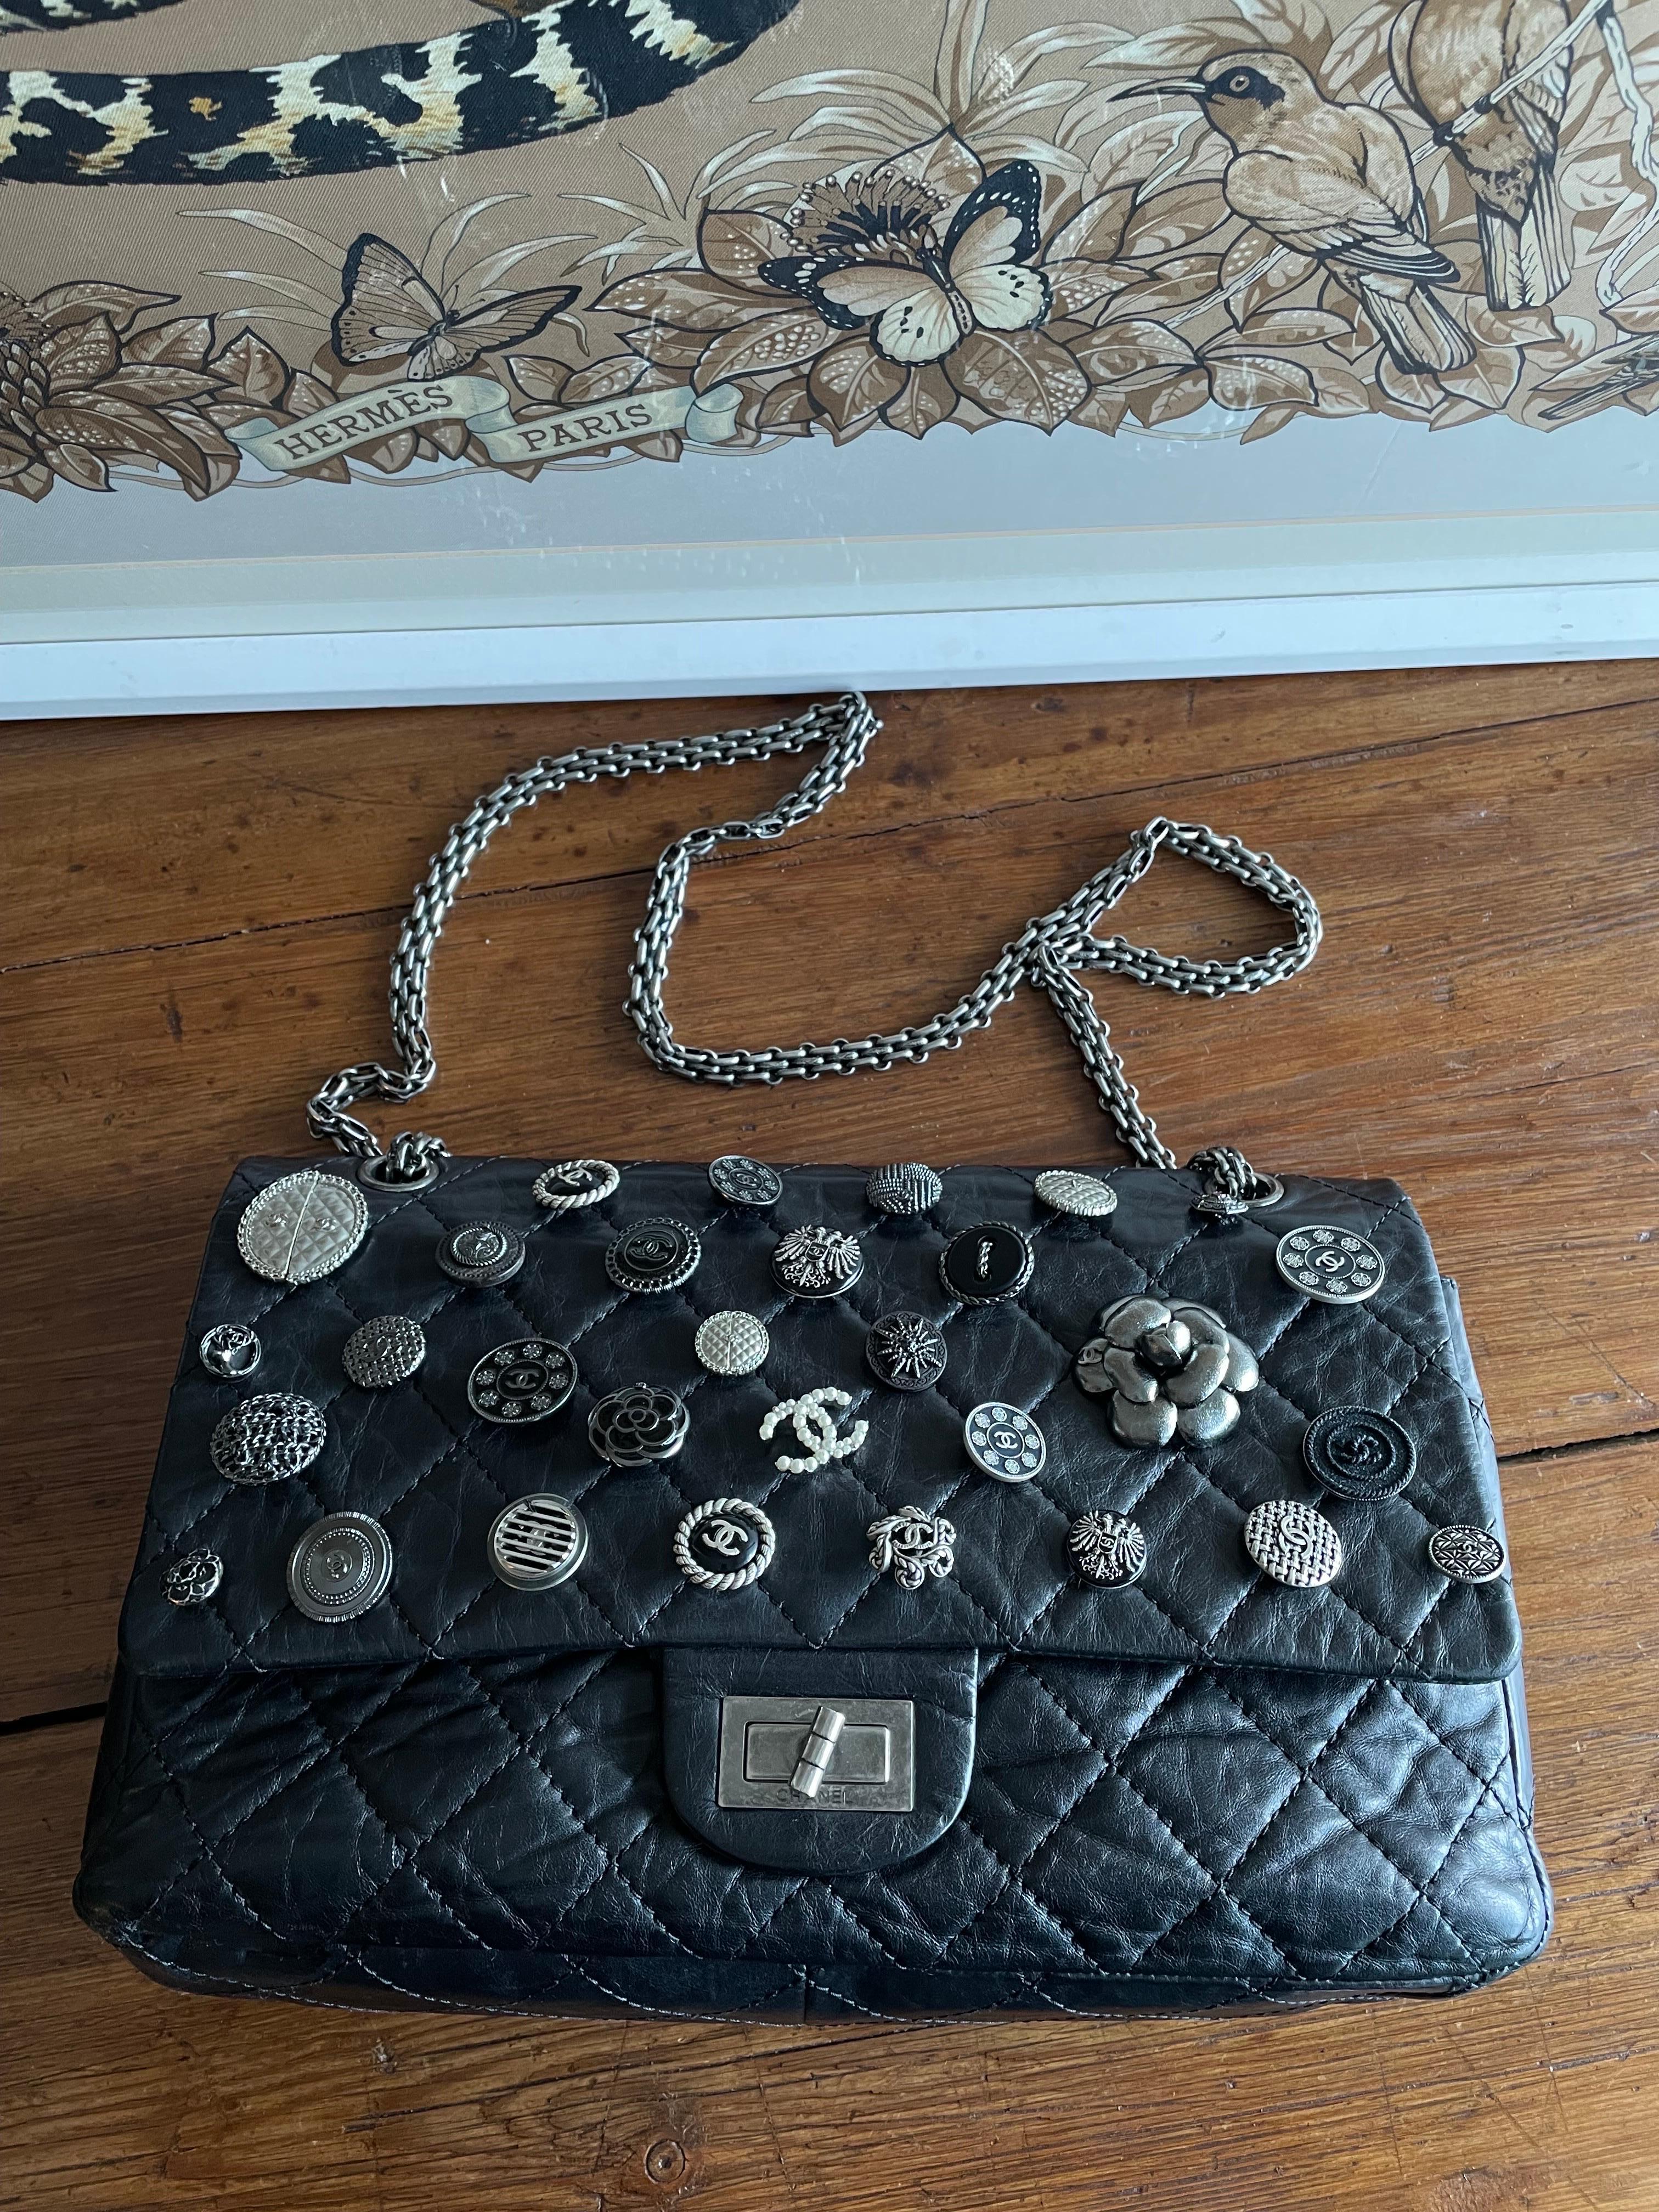 Chanel 2.55 bag in black leather lived effect, silver hardware. Unique bag, created by karl Lagerfeld, who thought, with his visionary genius, to enrich the bag with many different buttons. Others have been created, few and rare to find. Every bag